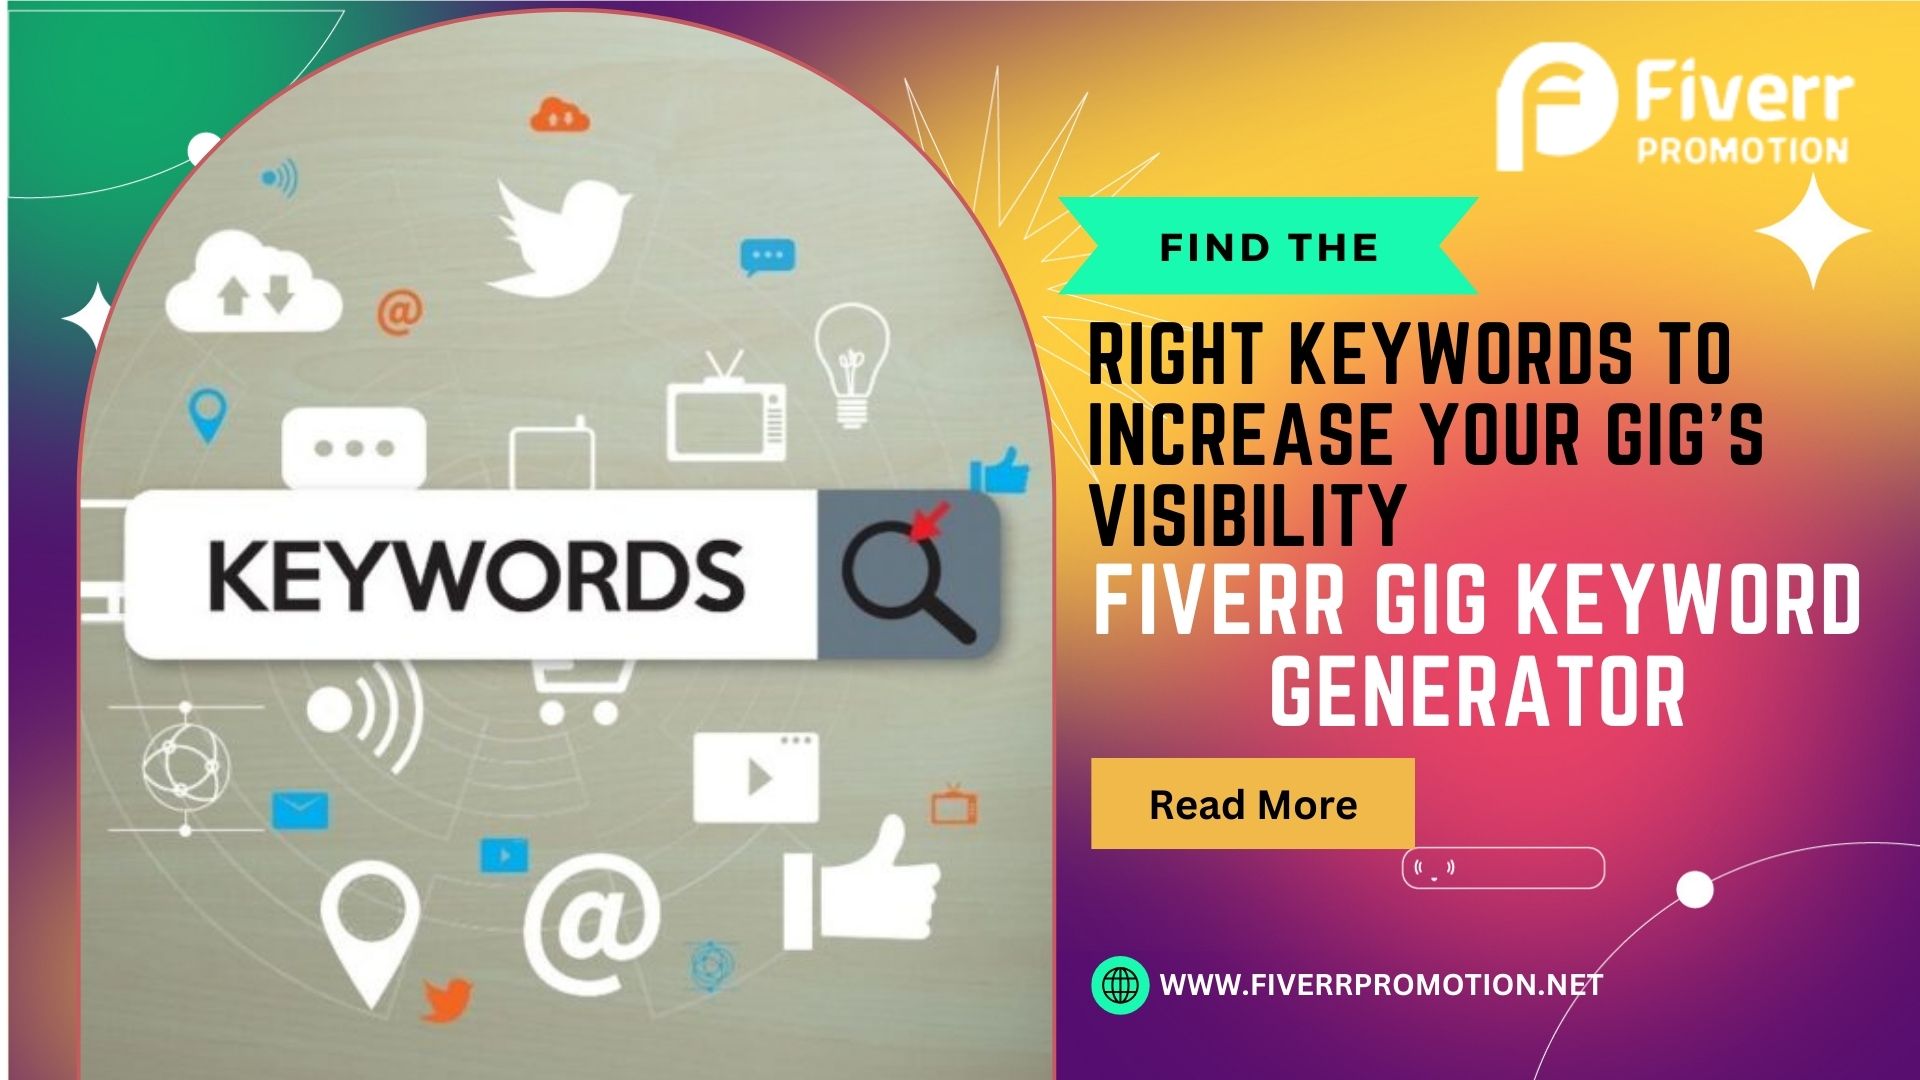 Fiverr Gig Keyword Generator: Find the Right Keywords to Increase Your Gig’s Visibility